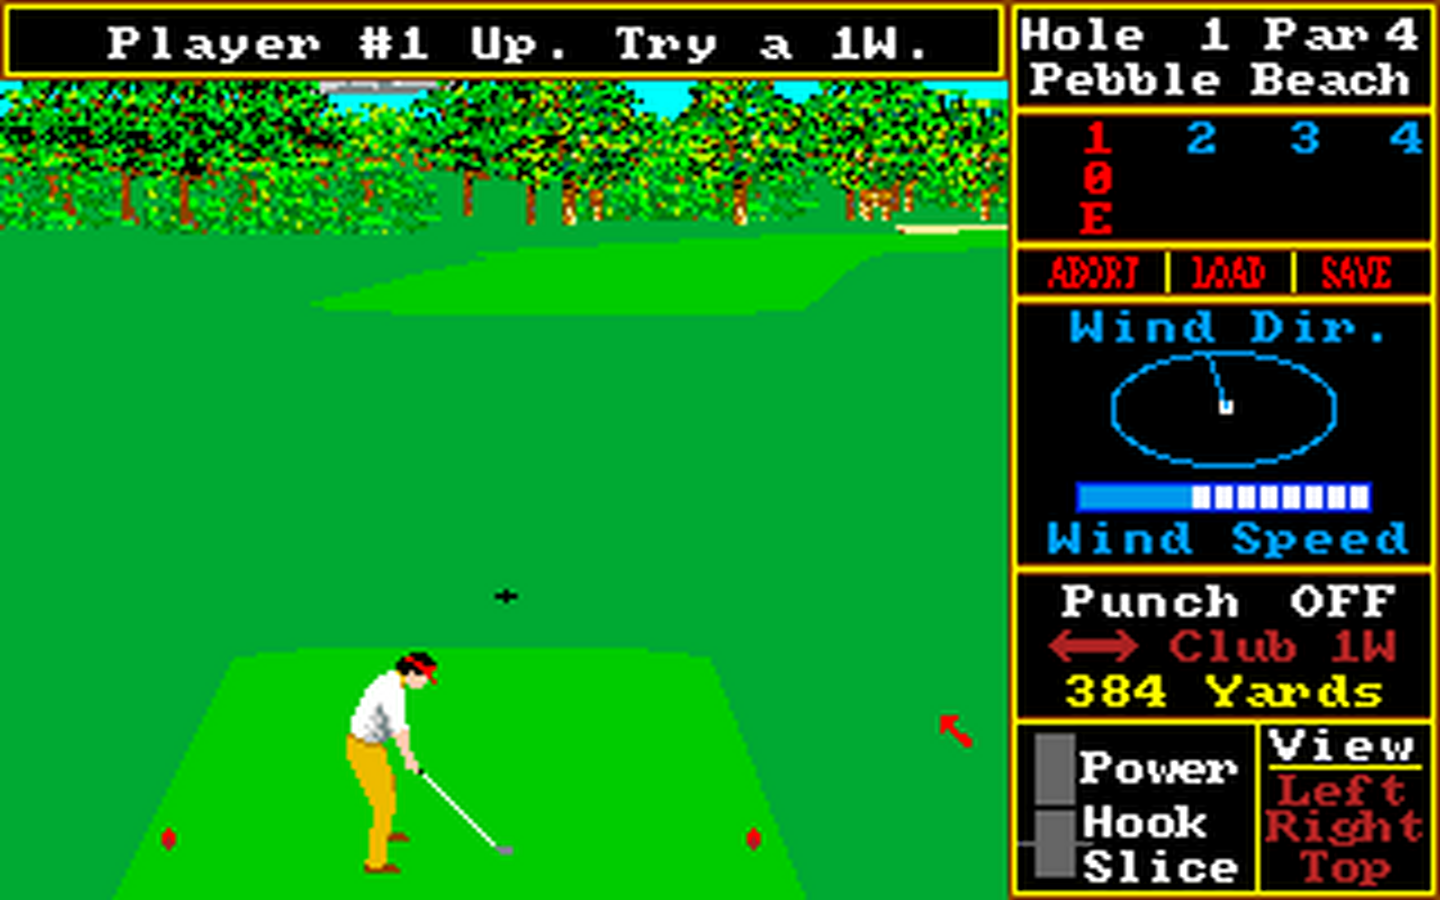 Amiga GameBase World_Class_Leader_Board_-_Famous_Courses_of_the_World_Vol._1 Access_-_U.S._Gold 1988